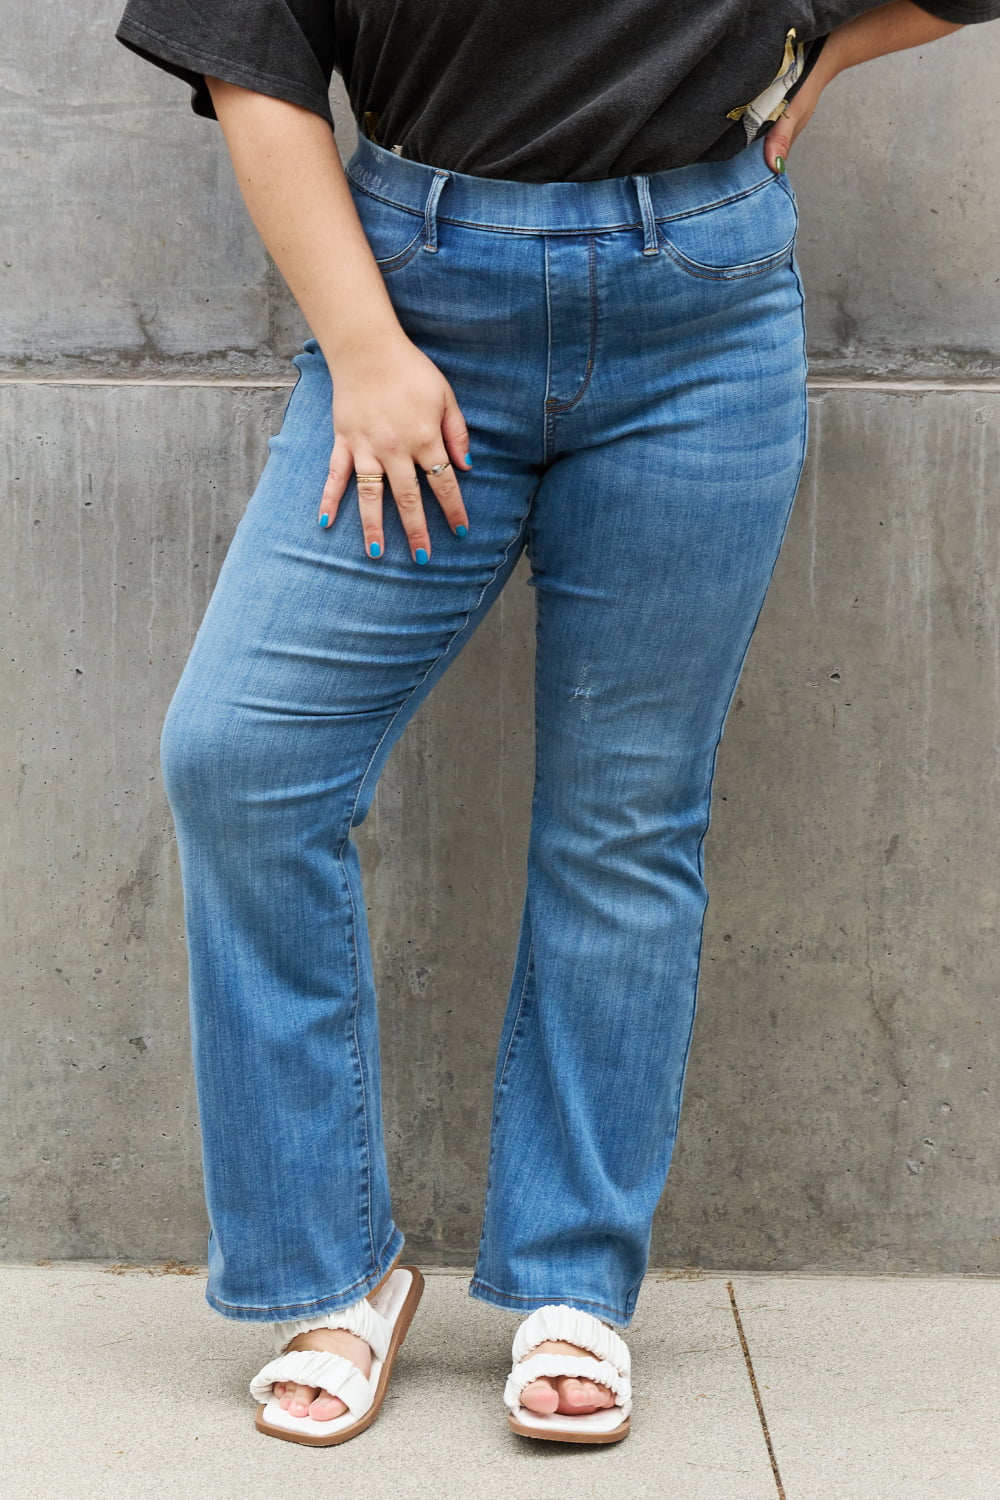 Plus Size, Judy Blue, High Waist Slim Bootcut Easy Pull On Jeans Style 88520